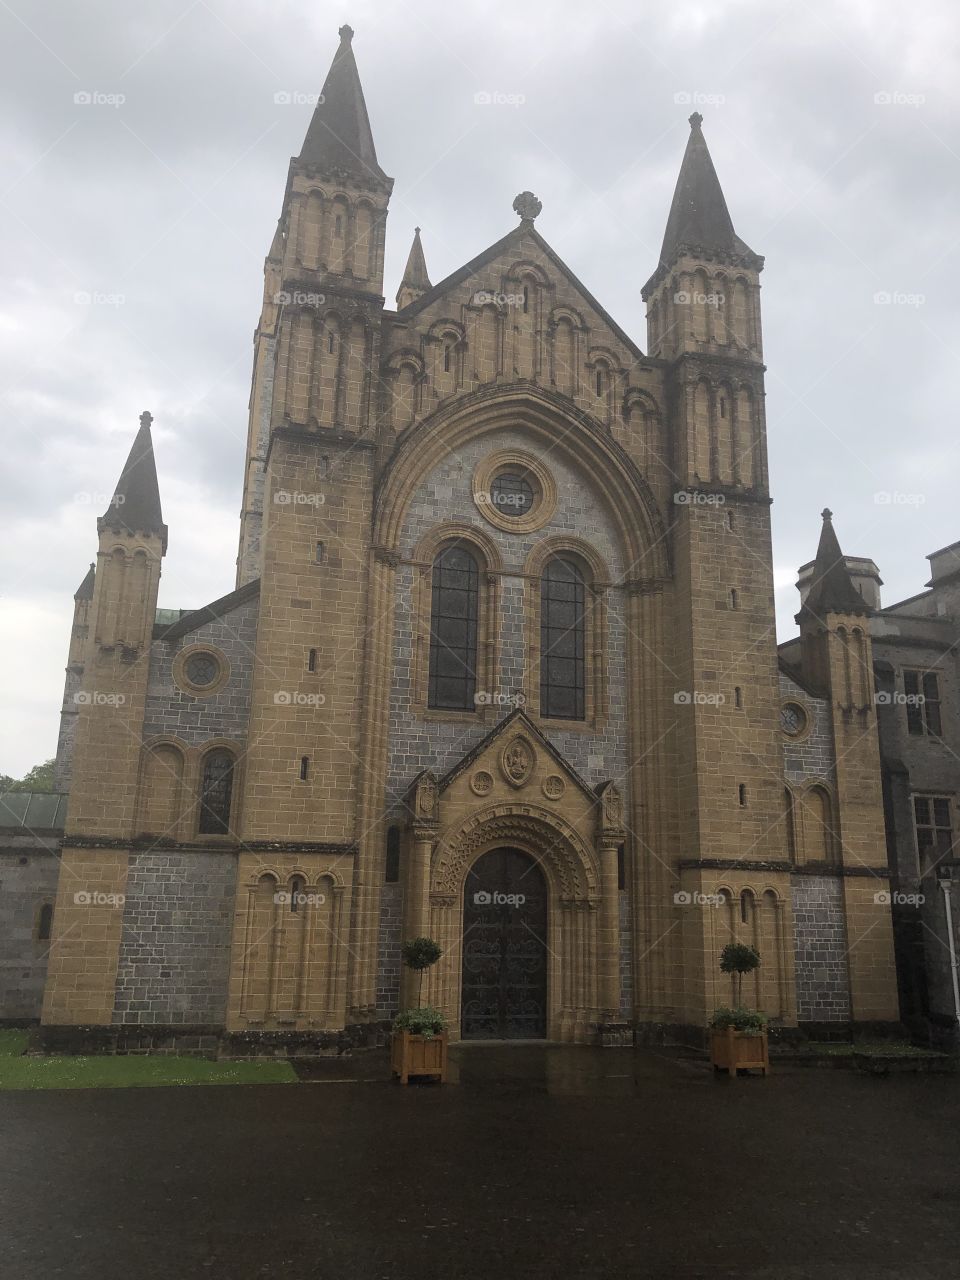 A building of immense stature that of Buckfast Abbey, in Devon, UK